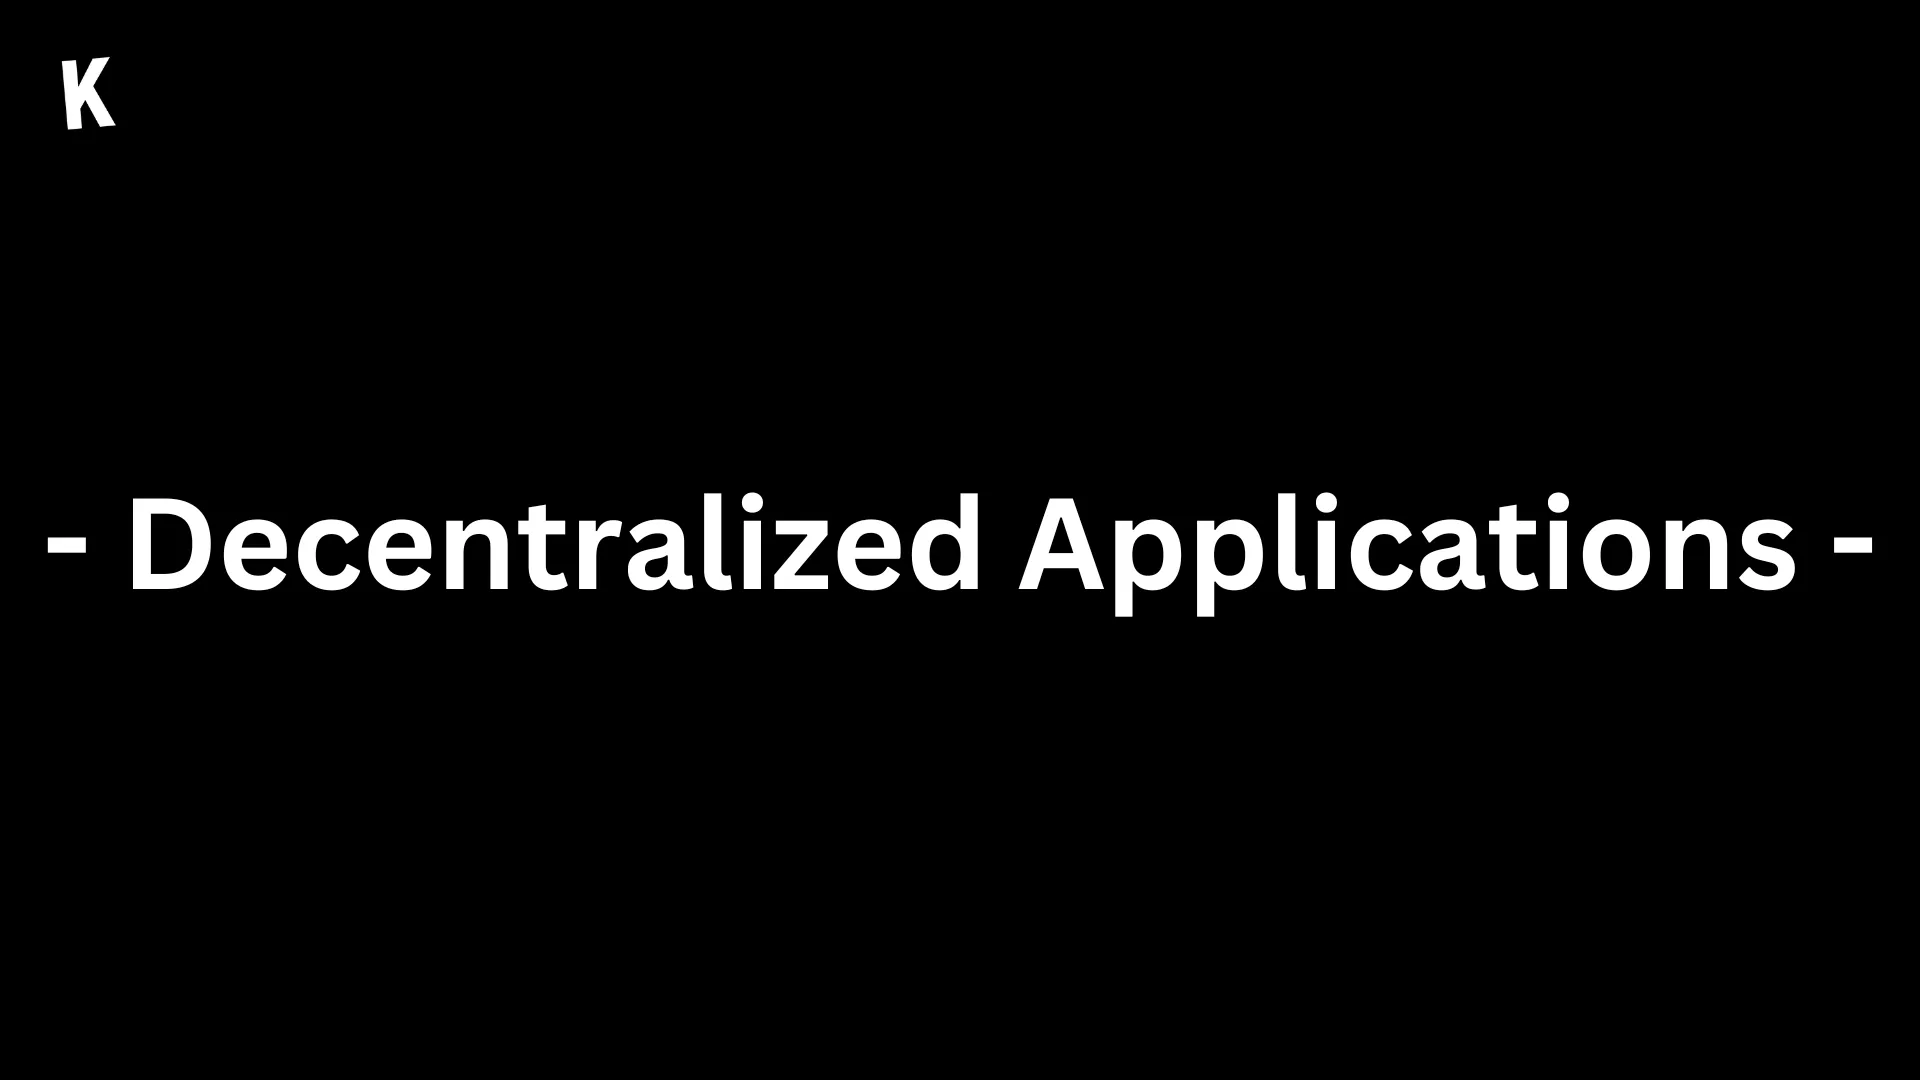 Decentralized Applications